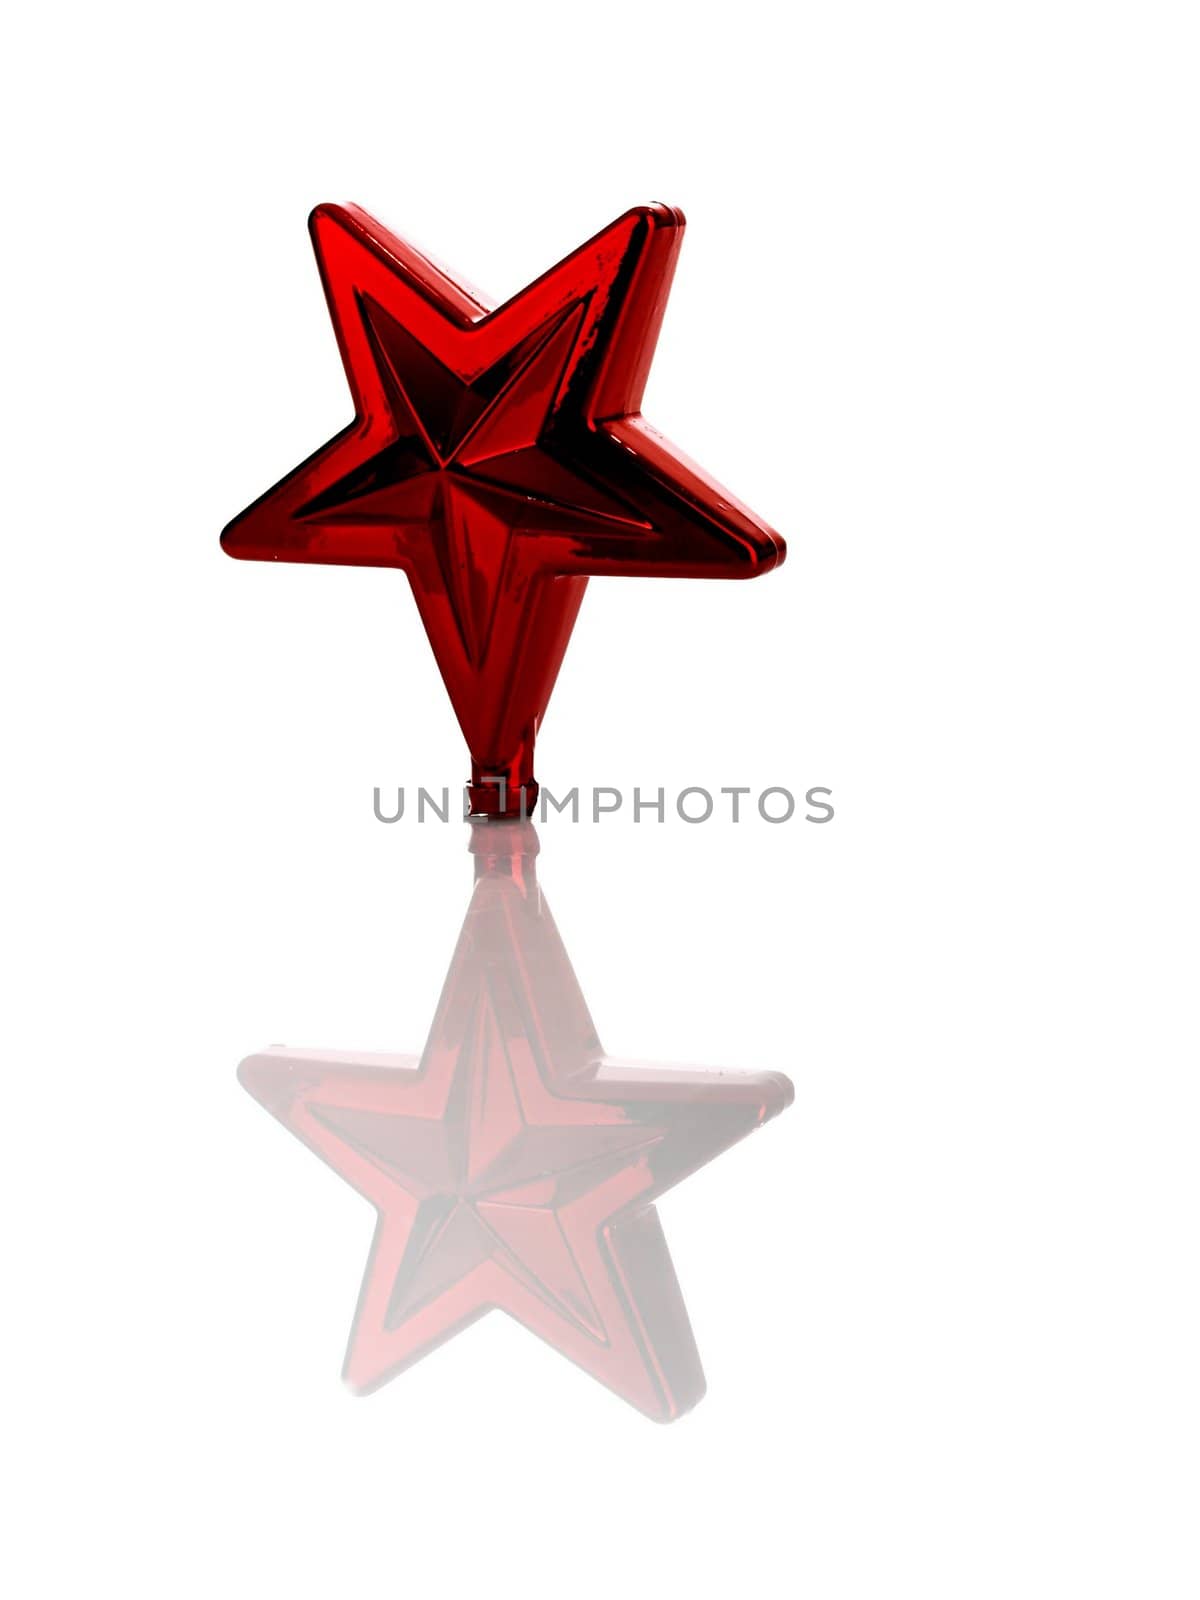 Red Christmas Star Ornament by Baltus